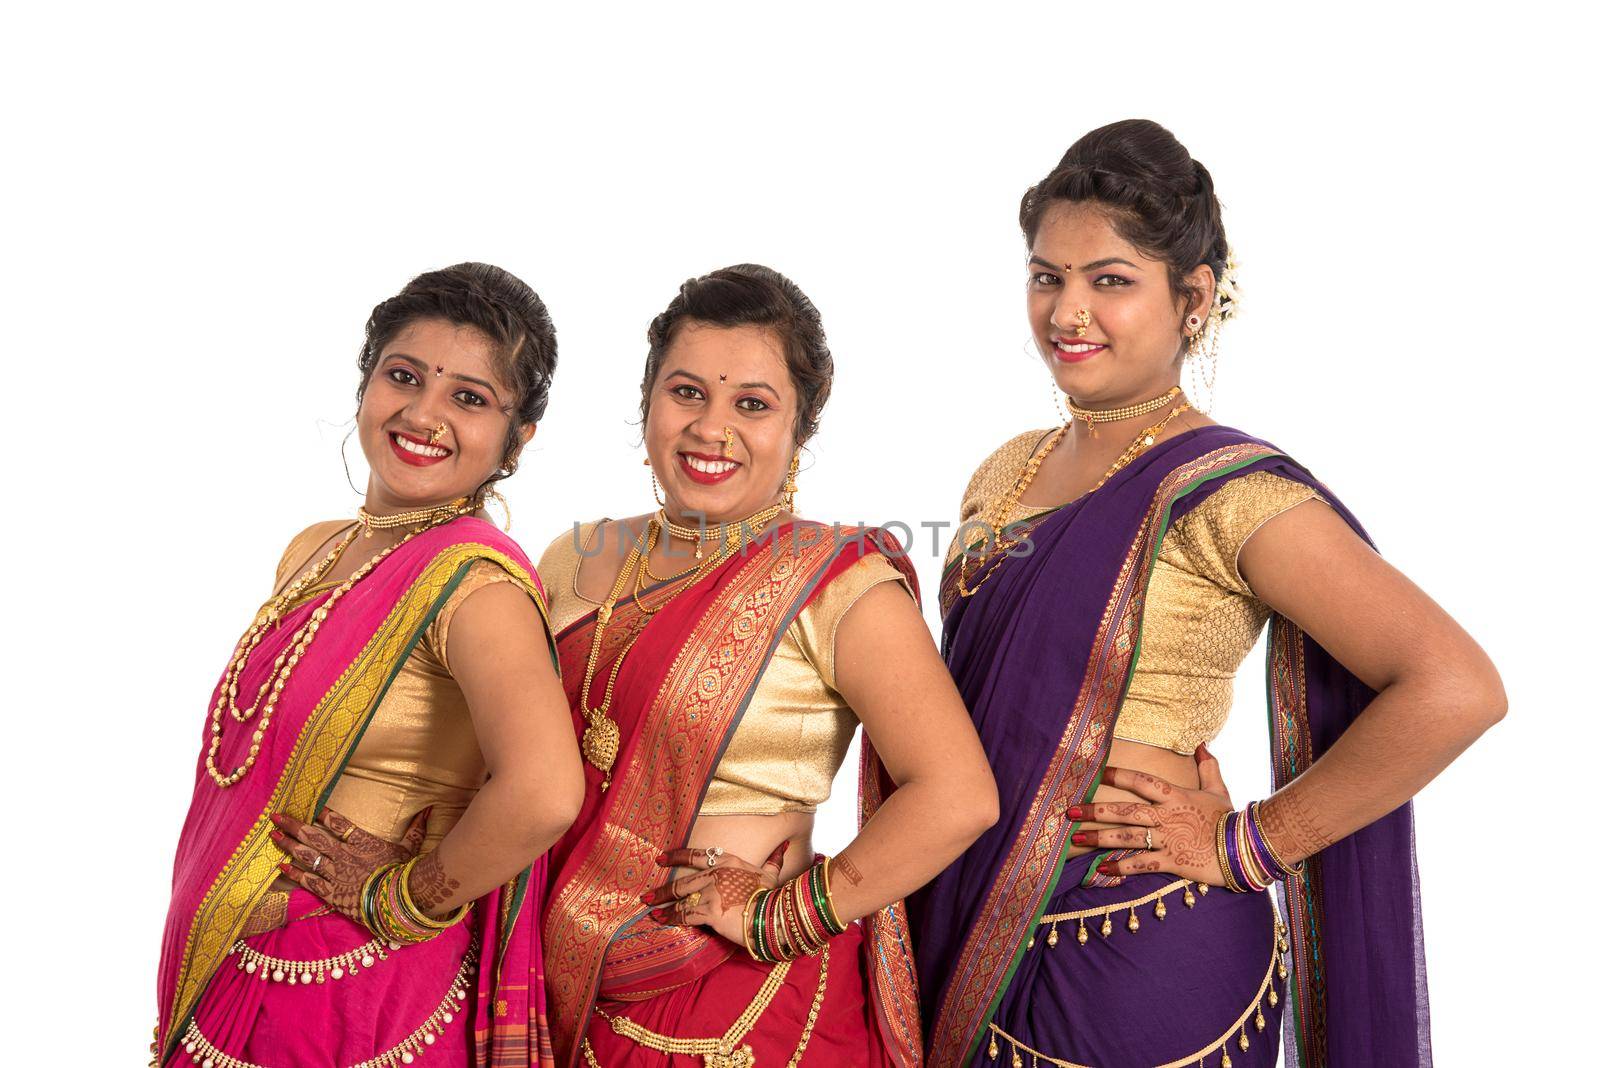 Traditional Beautiful Indian young girls in saree posing on white background by DipakShelare